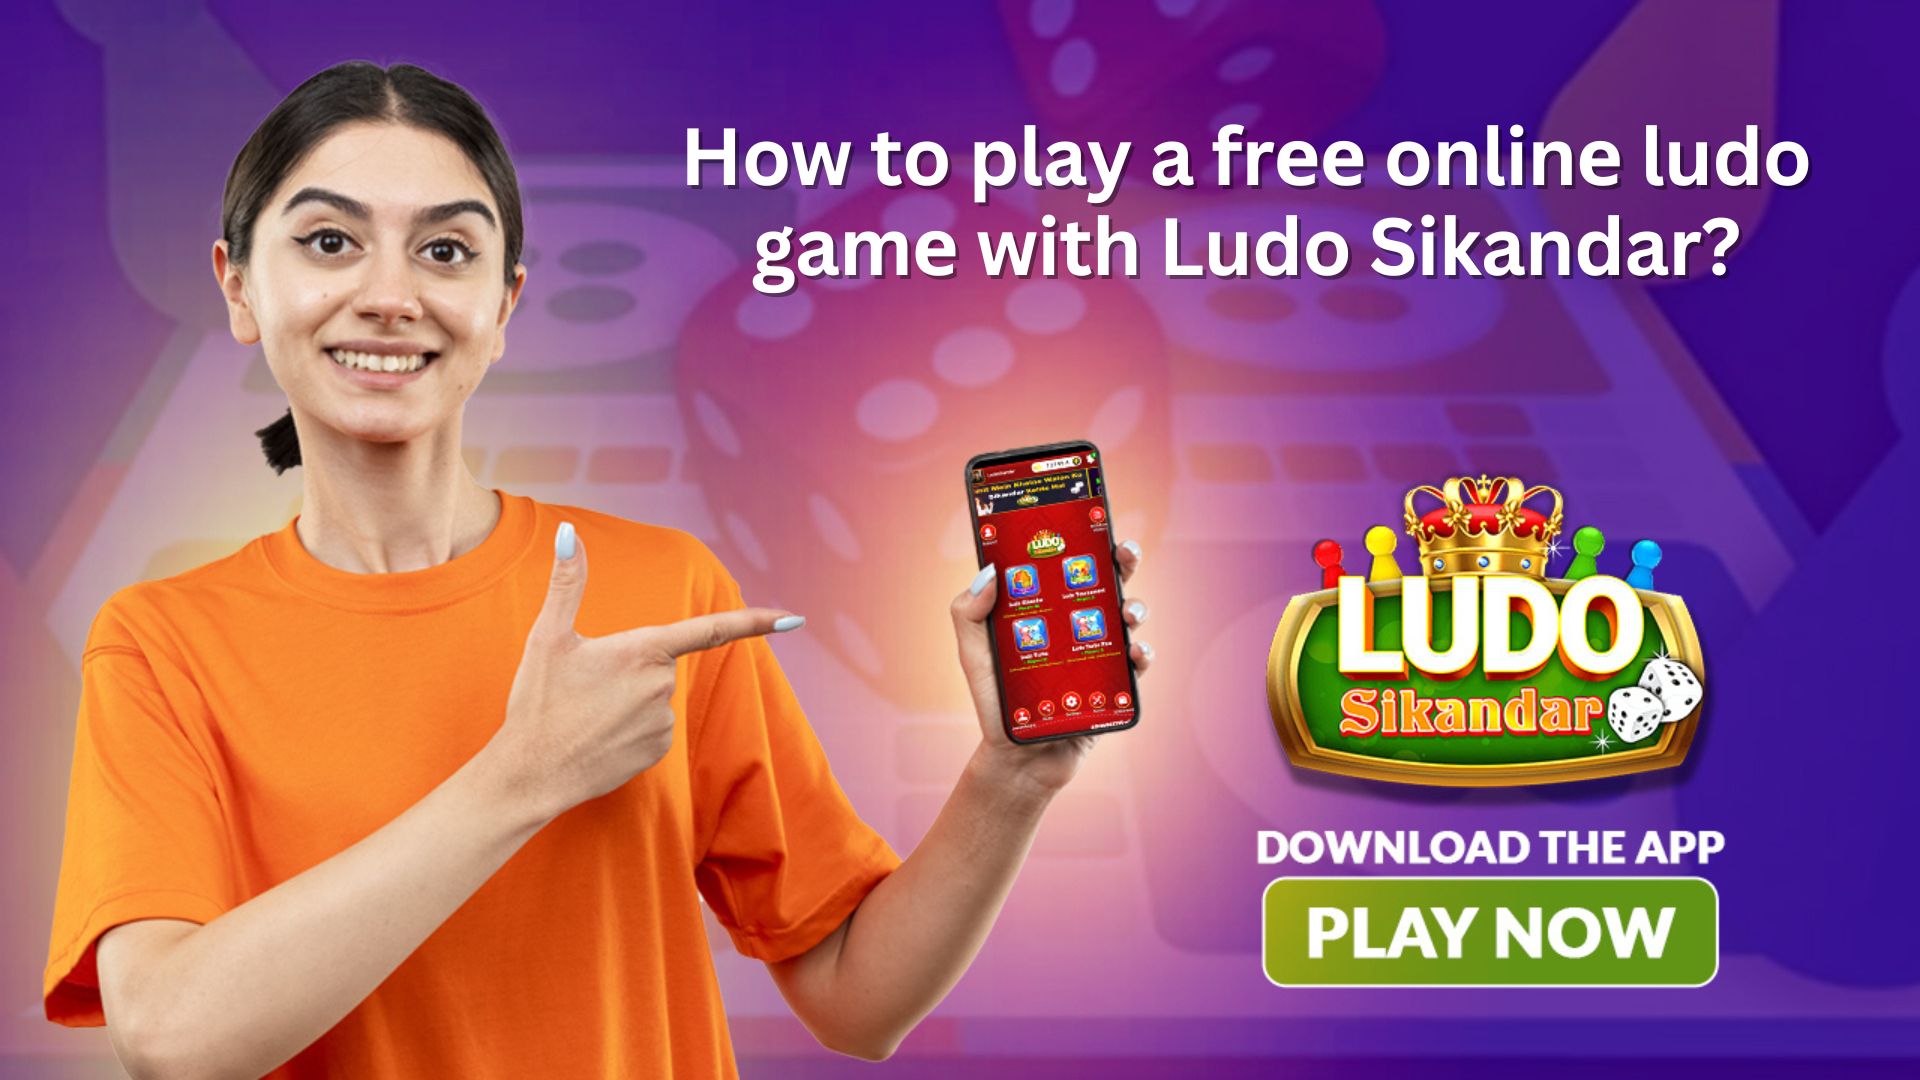 How to play a frее onlinе ludo gamе with Ludo Sikandar?